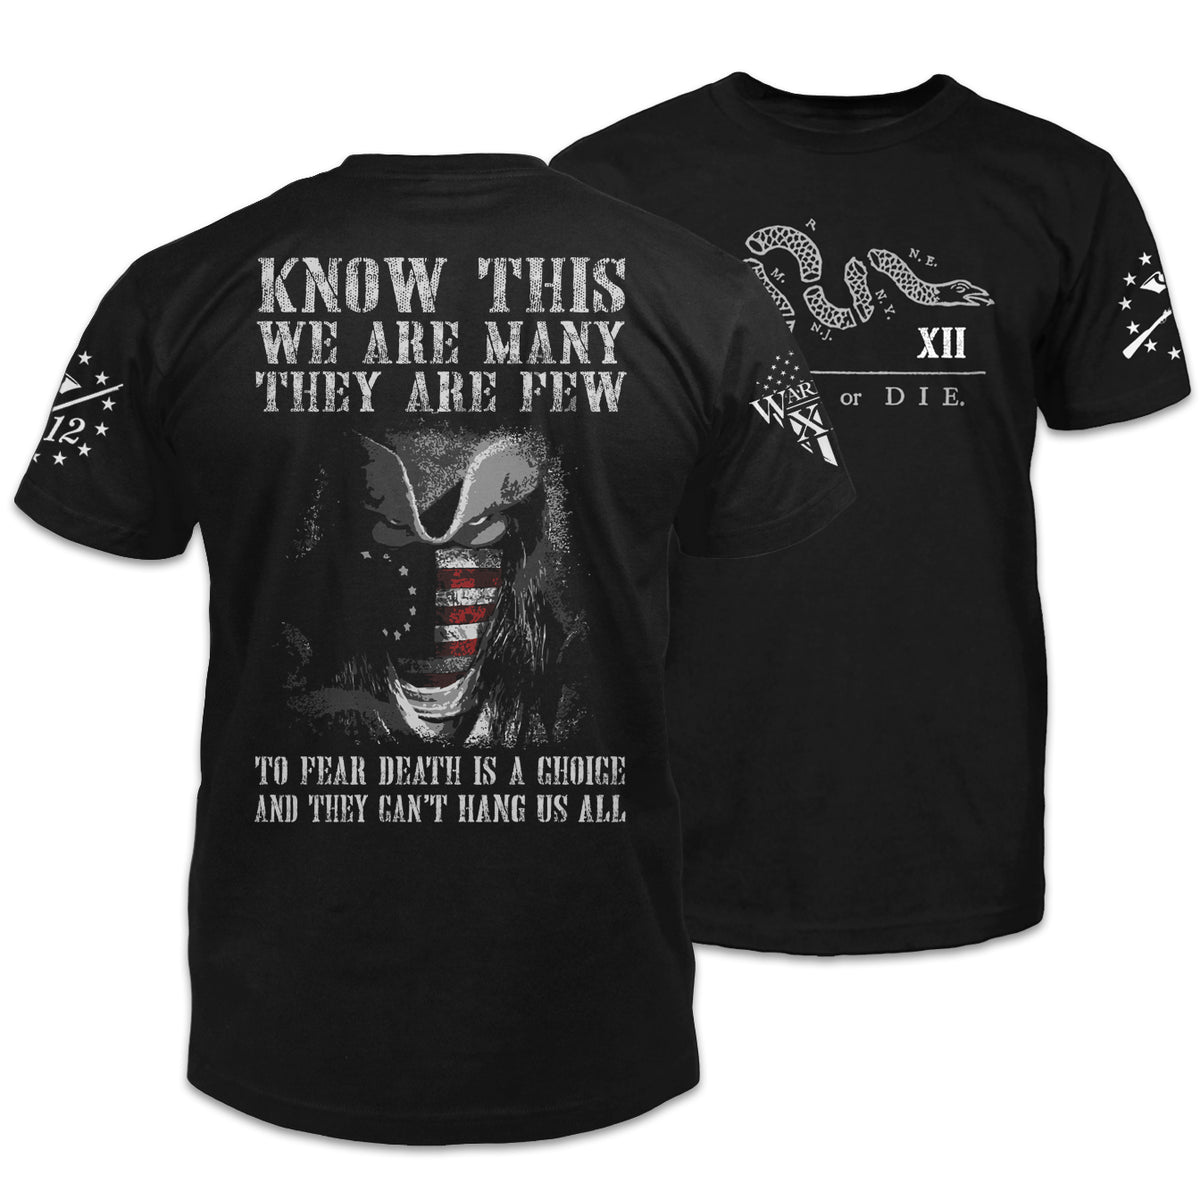 Front & back black t-shirt with the words, "Know This, We Are Many They Are Few. To Fear Death Is A Choice, And They Can't Hang Us All" on the back and the words "Join Or Die" on the front.